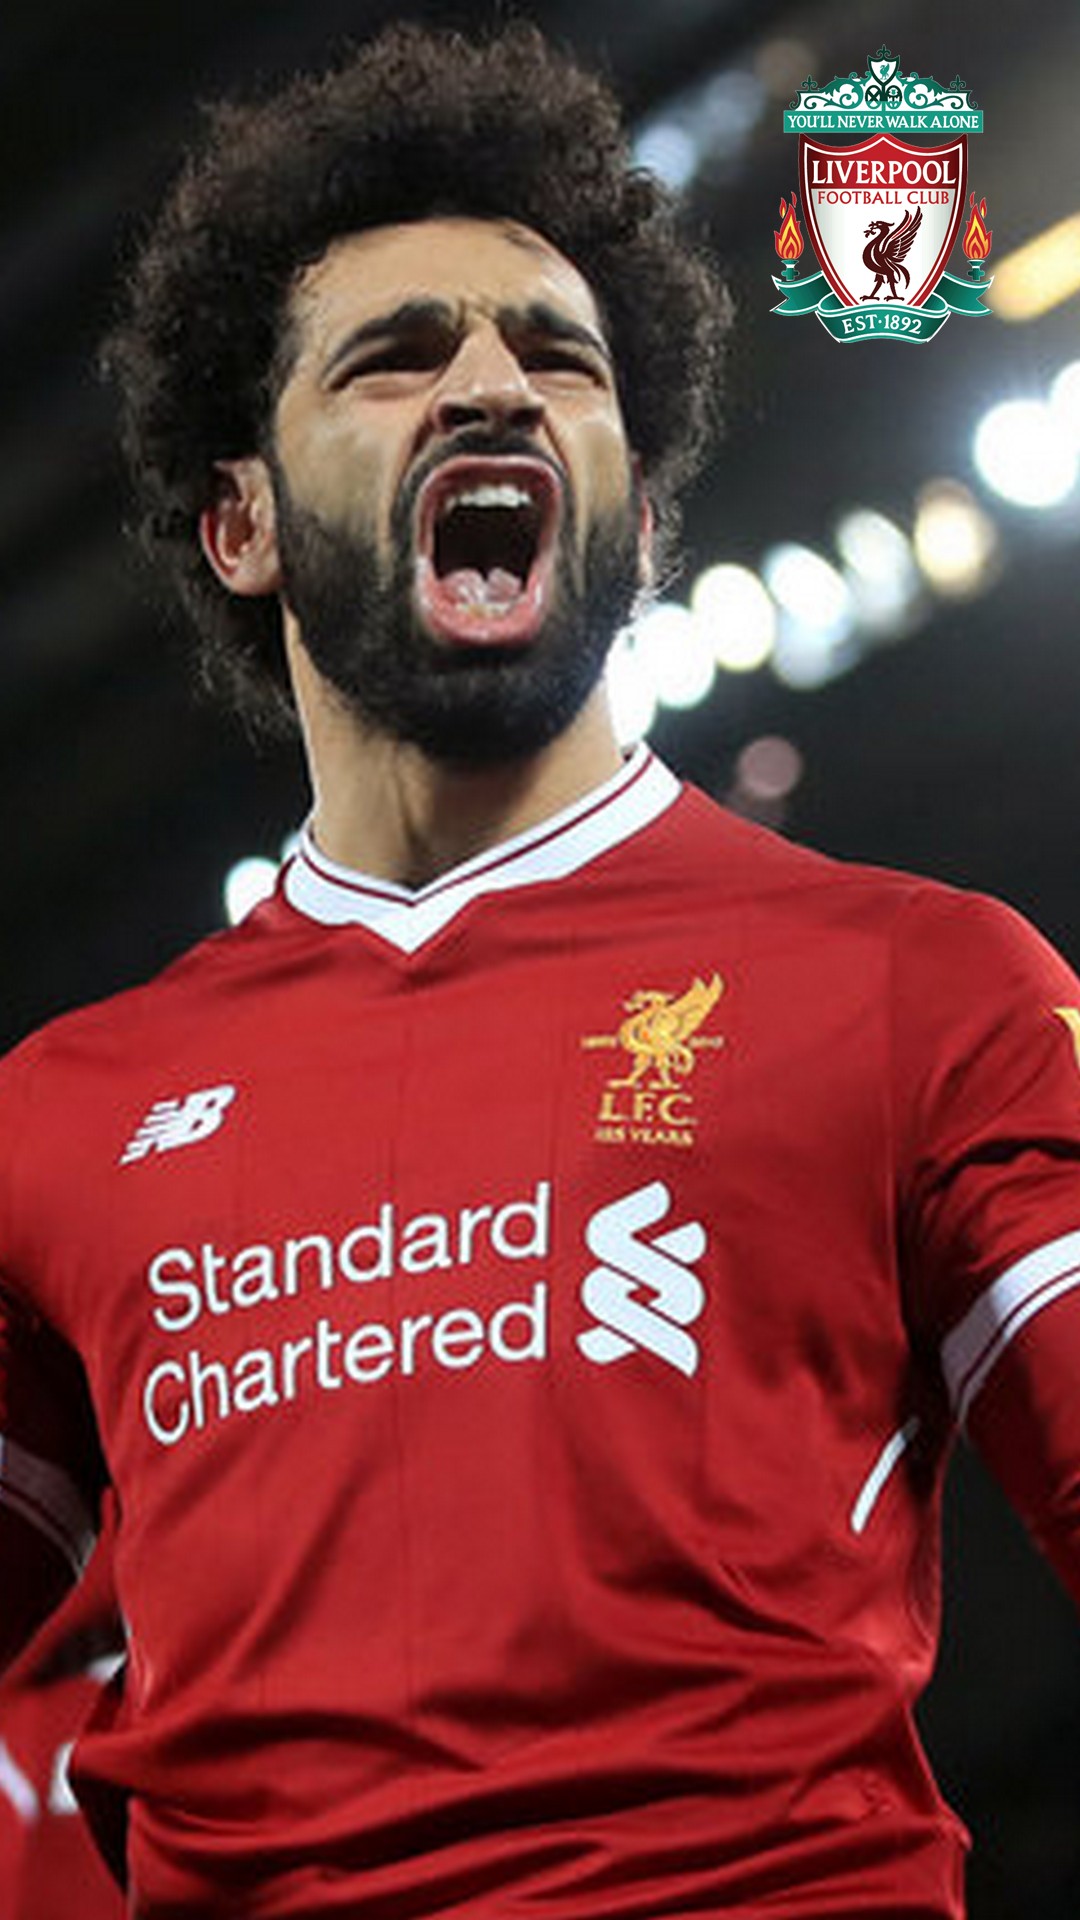 Mohamed Salah Android Wallpaper with image resolution 1080x1920 pixel. You can make this wallpaper for your Android backgrounds, Tablet, Smartphones Screensavers and Mobile Phone Lock Screen